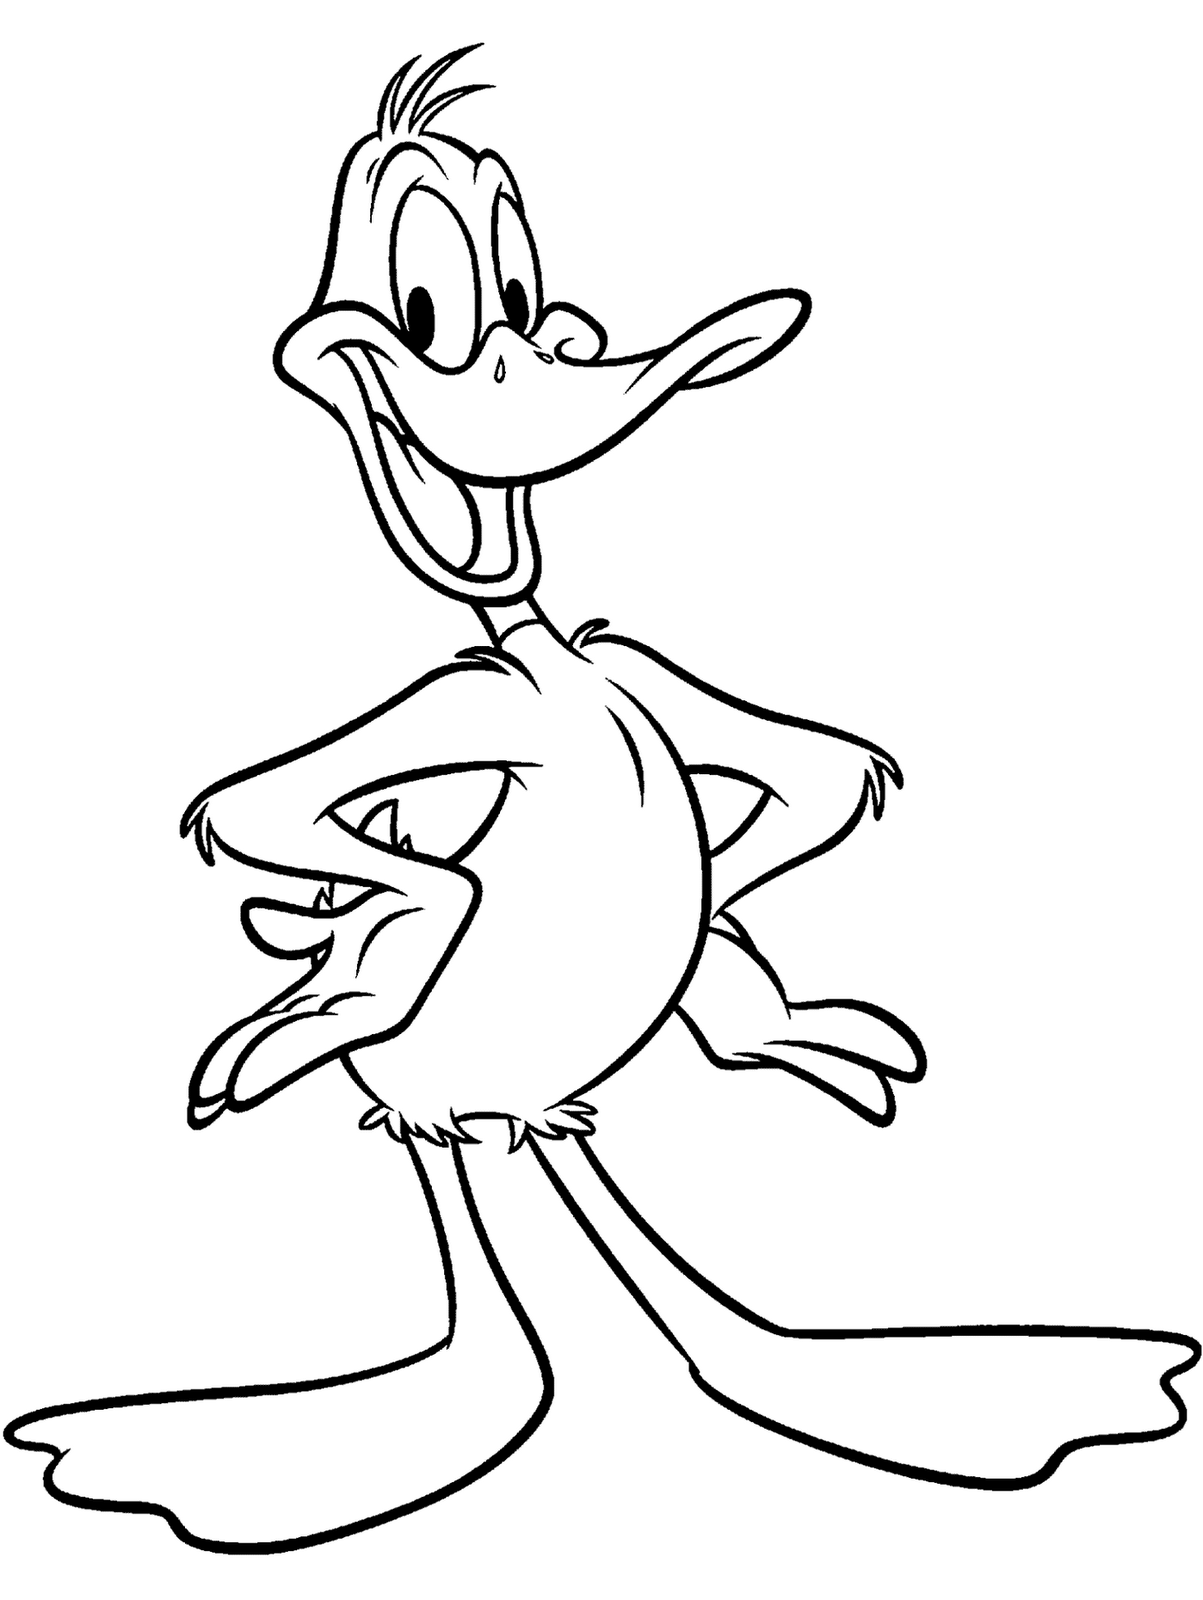 Coloring Blog for Kids: Daffy duck coloring pictures